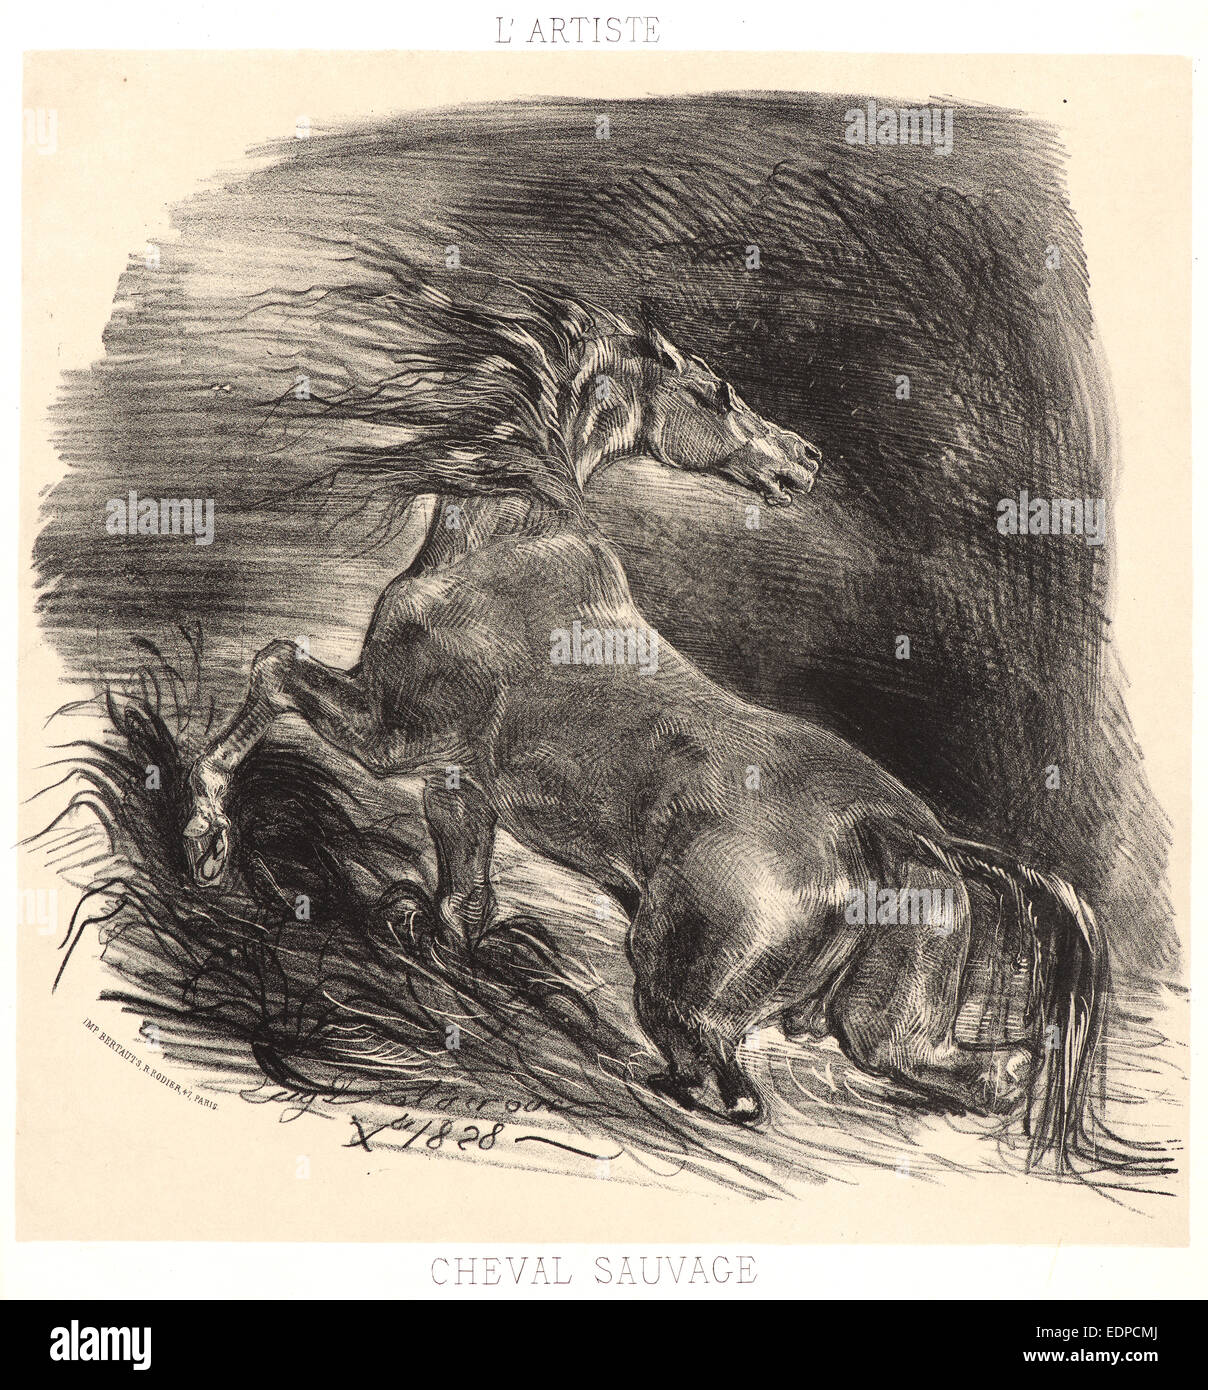 Eugène Delacroix (French, 1798 - 1863). A Wild Horse Emerging from Water (Cheval sauvage sortant de l'eau), 1828. Lithograph Stock Photo